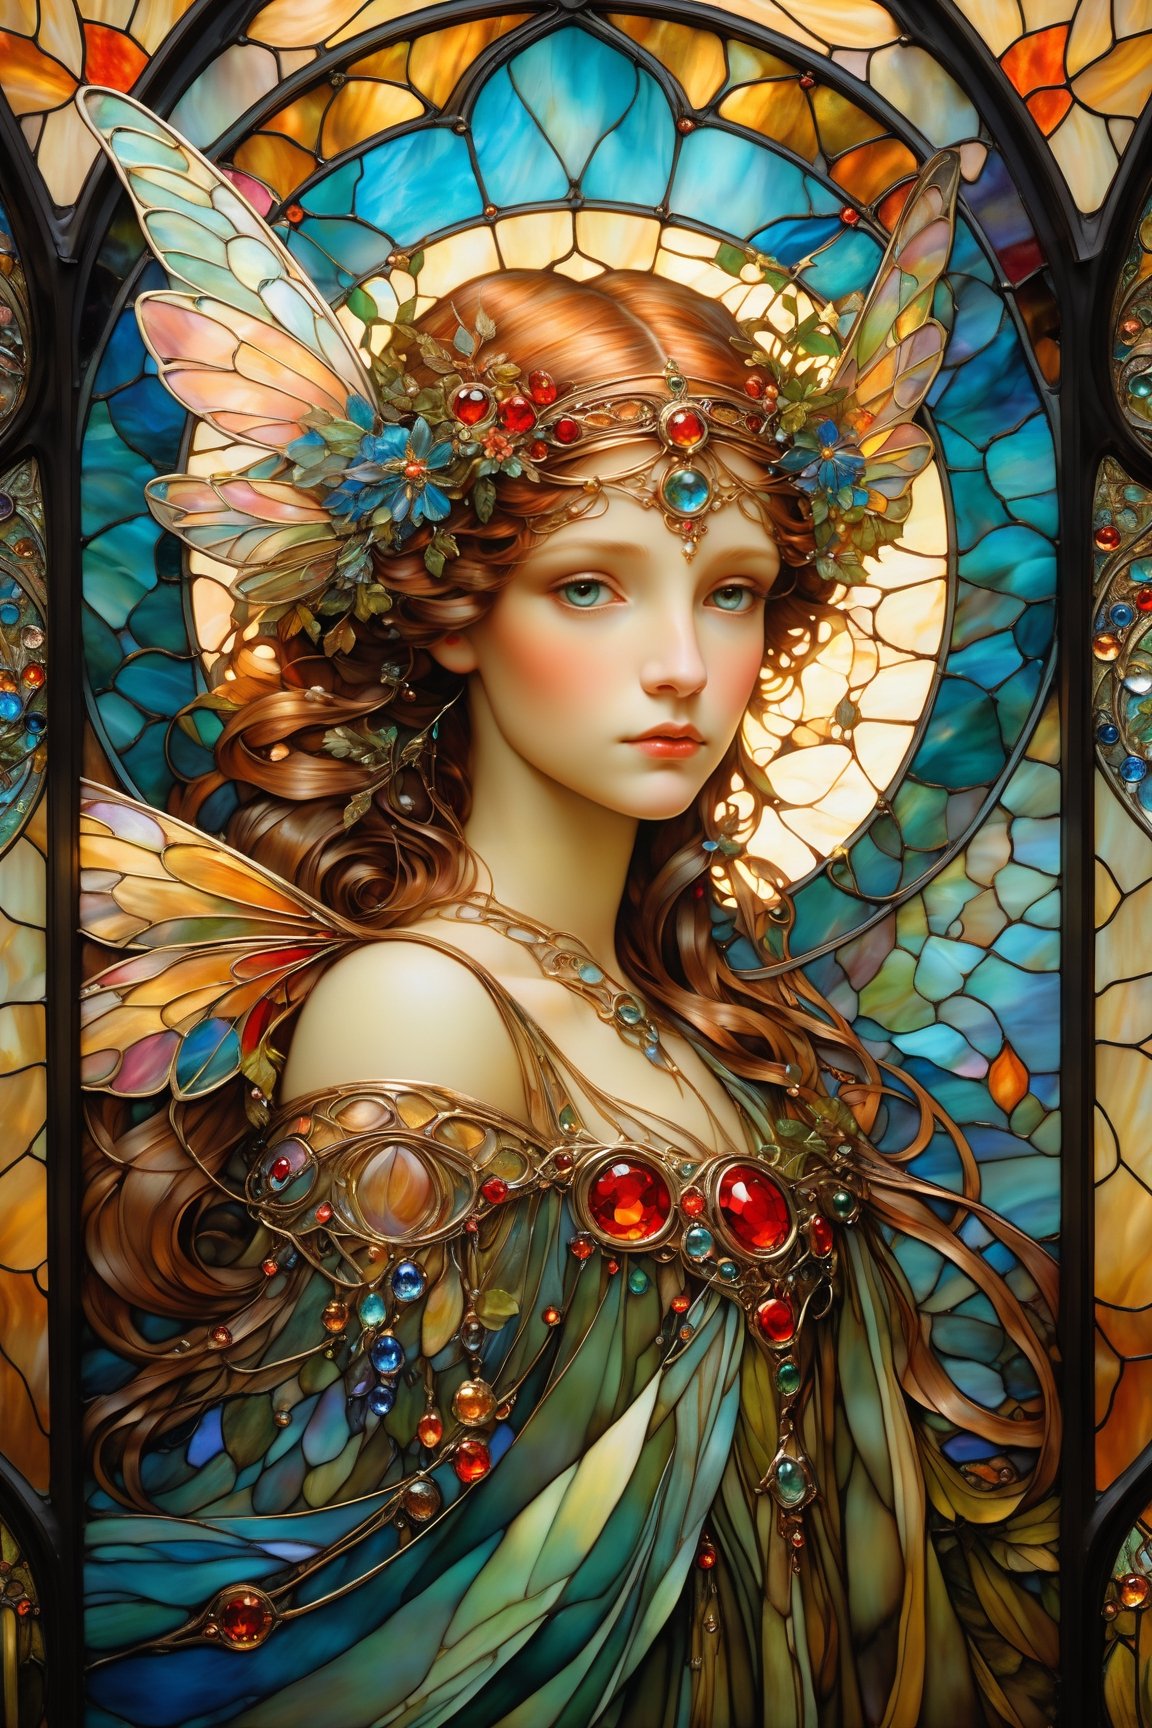 Fairy, large wings, magical fantasy art is done in oil paint and liquid chrome, liquid rainbow, golden leaf, golden line, copper surfaces, shining red jewels, best quality, fairytale, patchwork, (stained glass:1.2), storybook detailed illustration, cinematic, ultra highly detailed, tiny details, beautiful details, mystical, luminism, vibrant colors, complex background, resolution hyperdetailed intricate liminal eerie precisionism, DSLR filmic hyperdetailed, intricate background, (dark luminescent:1.2) art by Alphonse Mucha, Kinuno Y Craft, Brian Froud, Arthur Rackham, Jean Baptiste Monge,crystalz